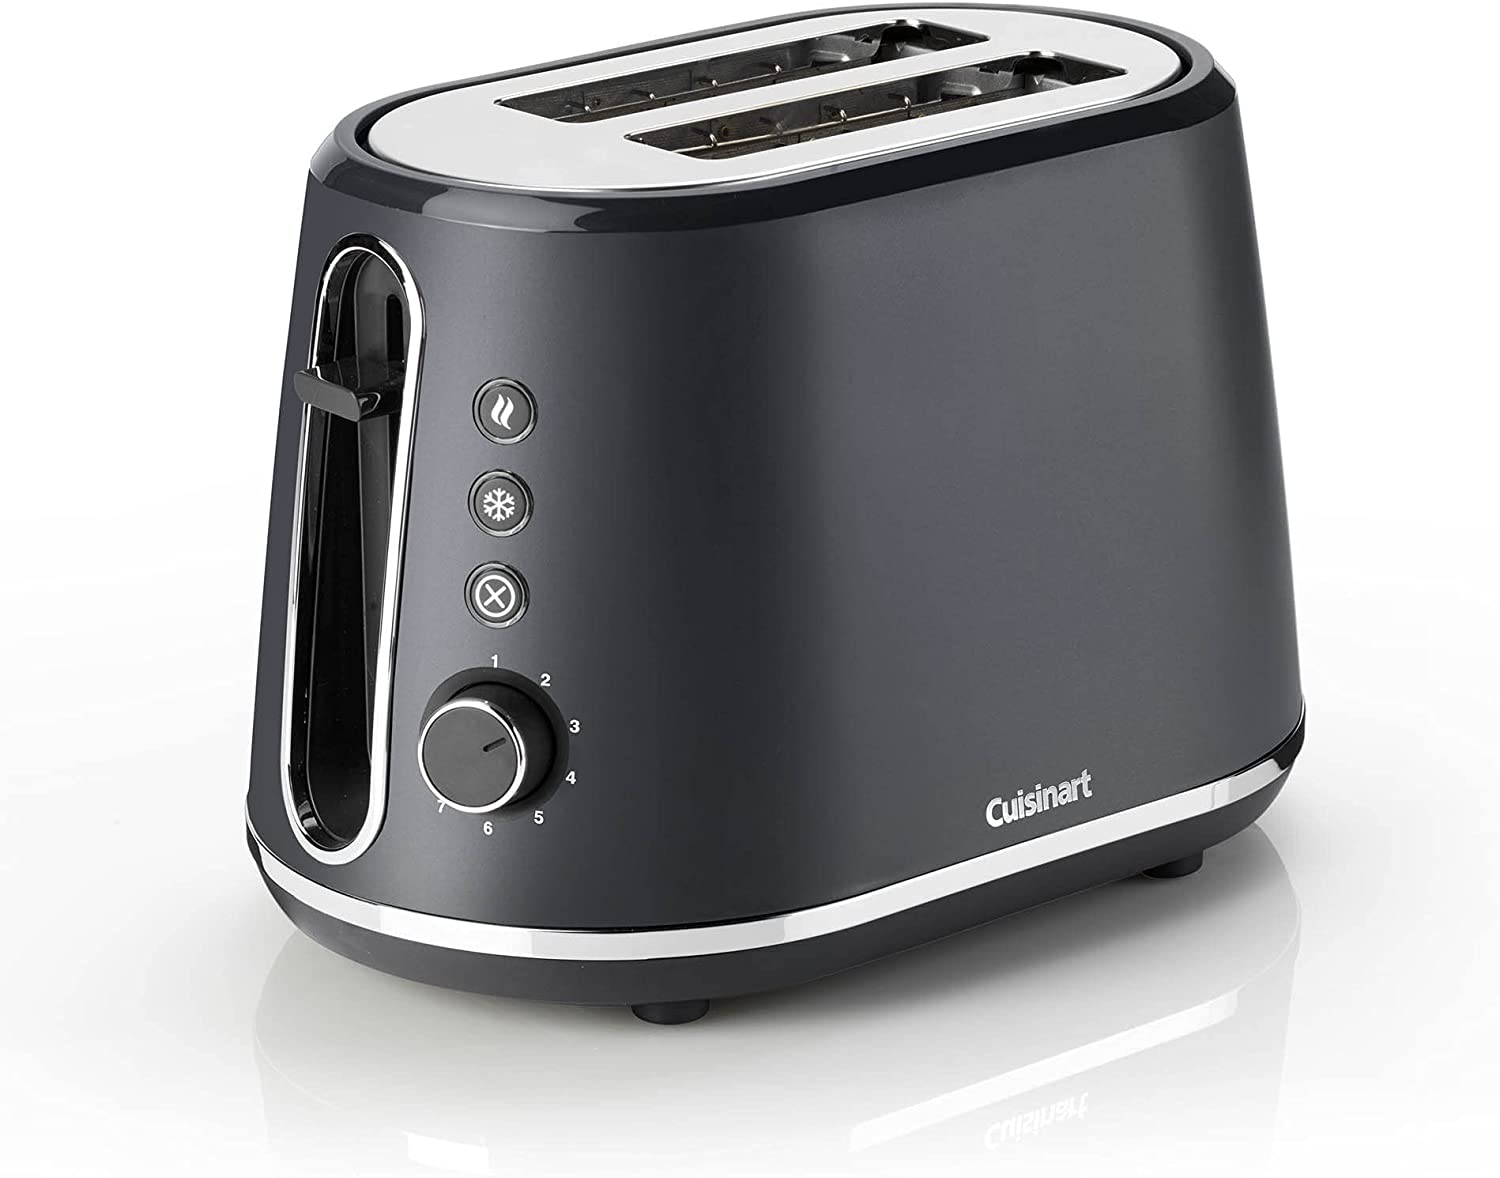 Cuisinart 2-slot toaster with 7 browning levels and extra wide slots with self-centring and crumb tray, also suitable for bread halves, slate grey, CPT780E